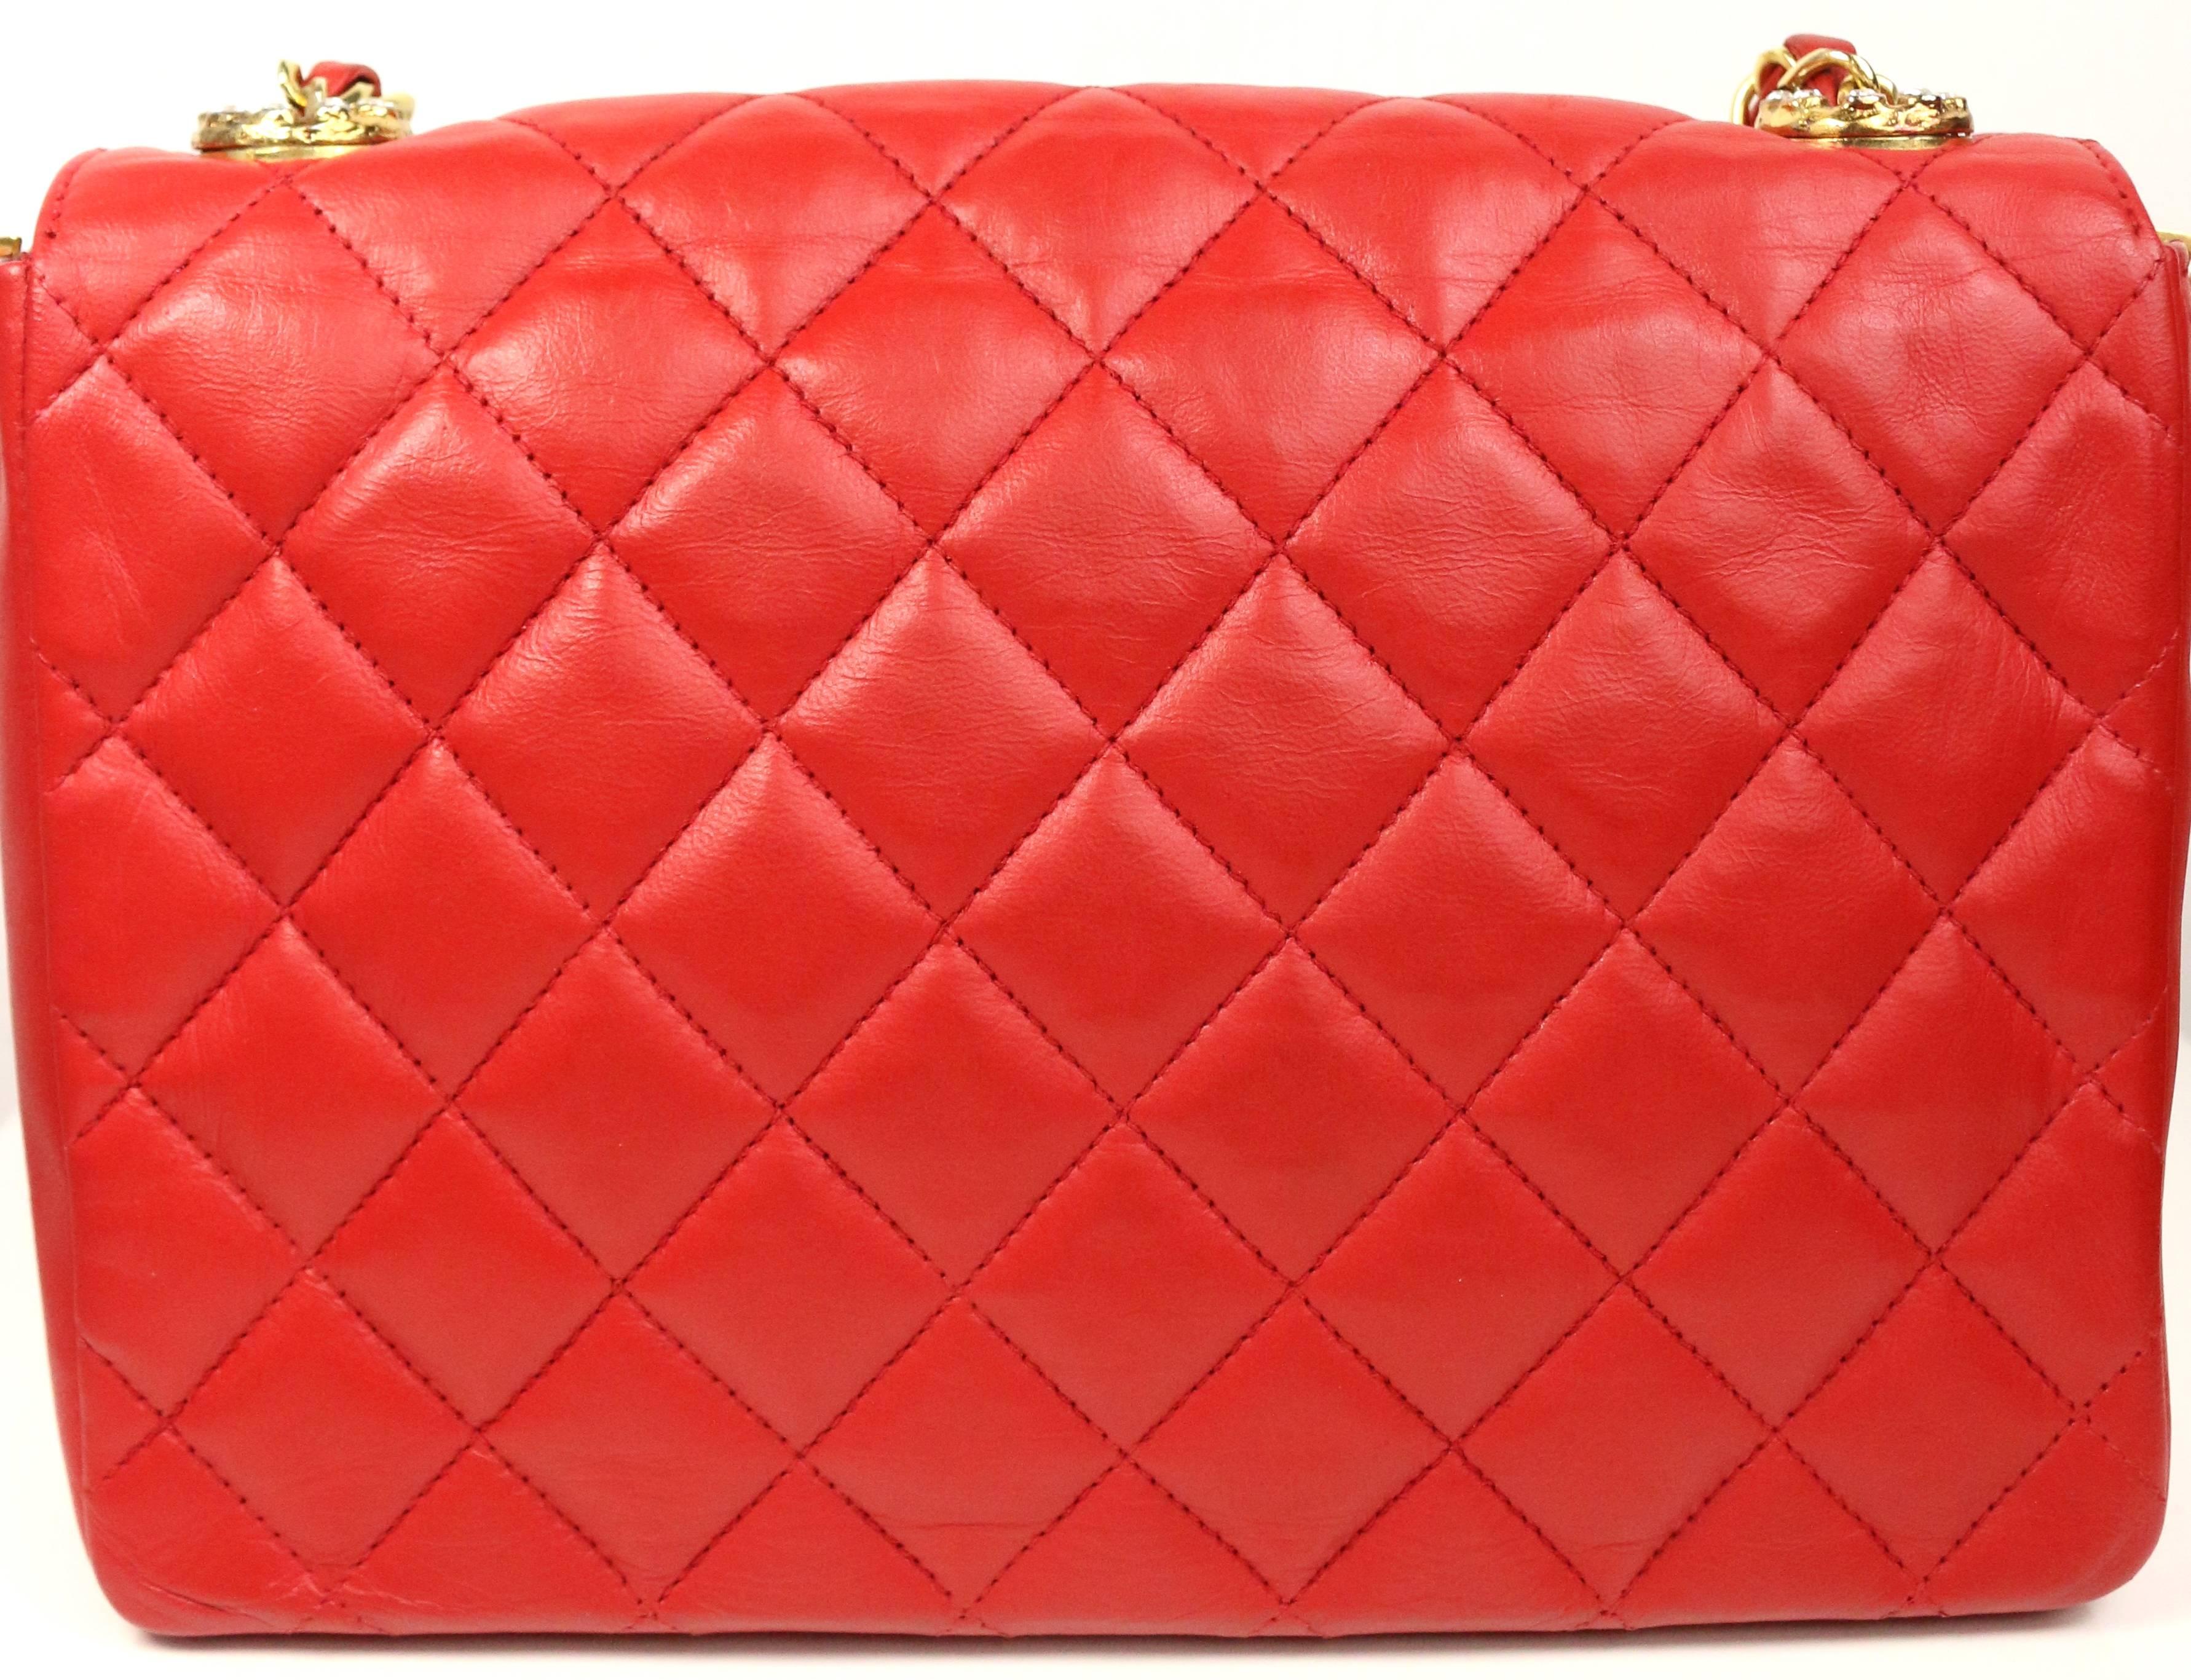 red chanel purse